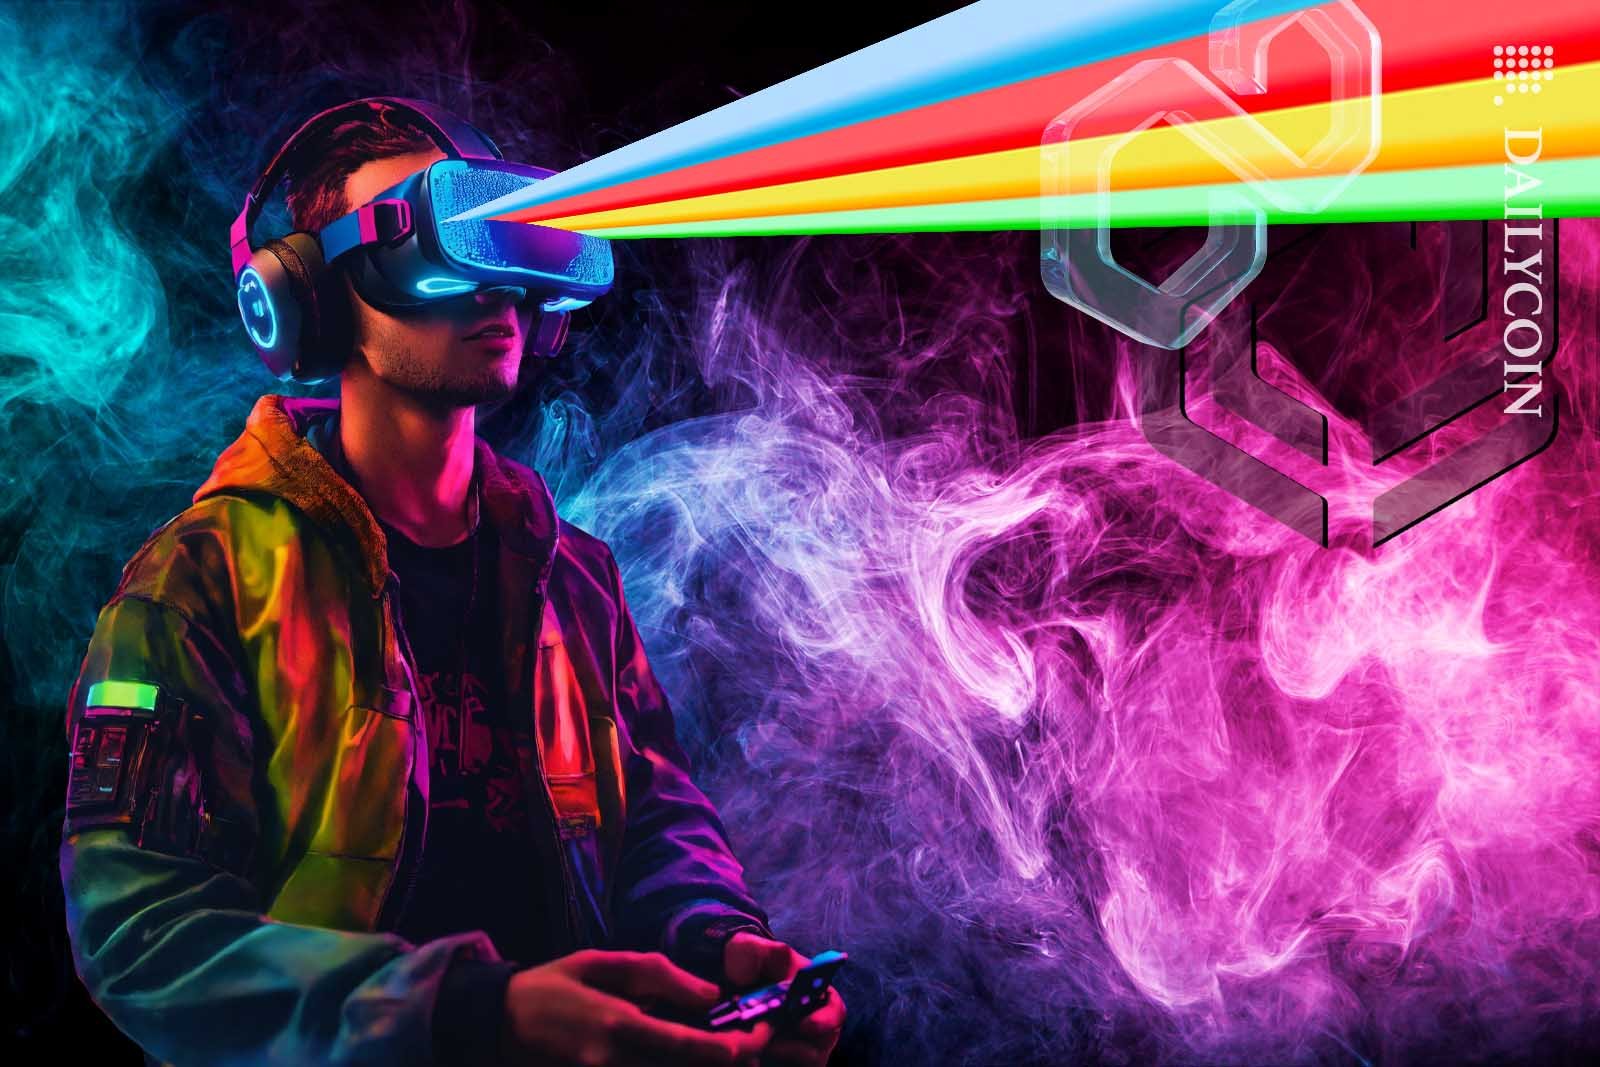 Very colourful gamer guy vearing VR glasses and headphones sitting in a smoke filled room.